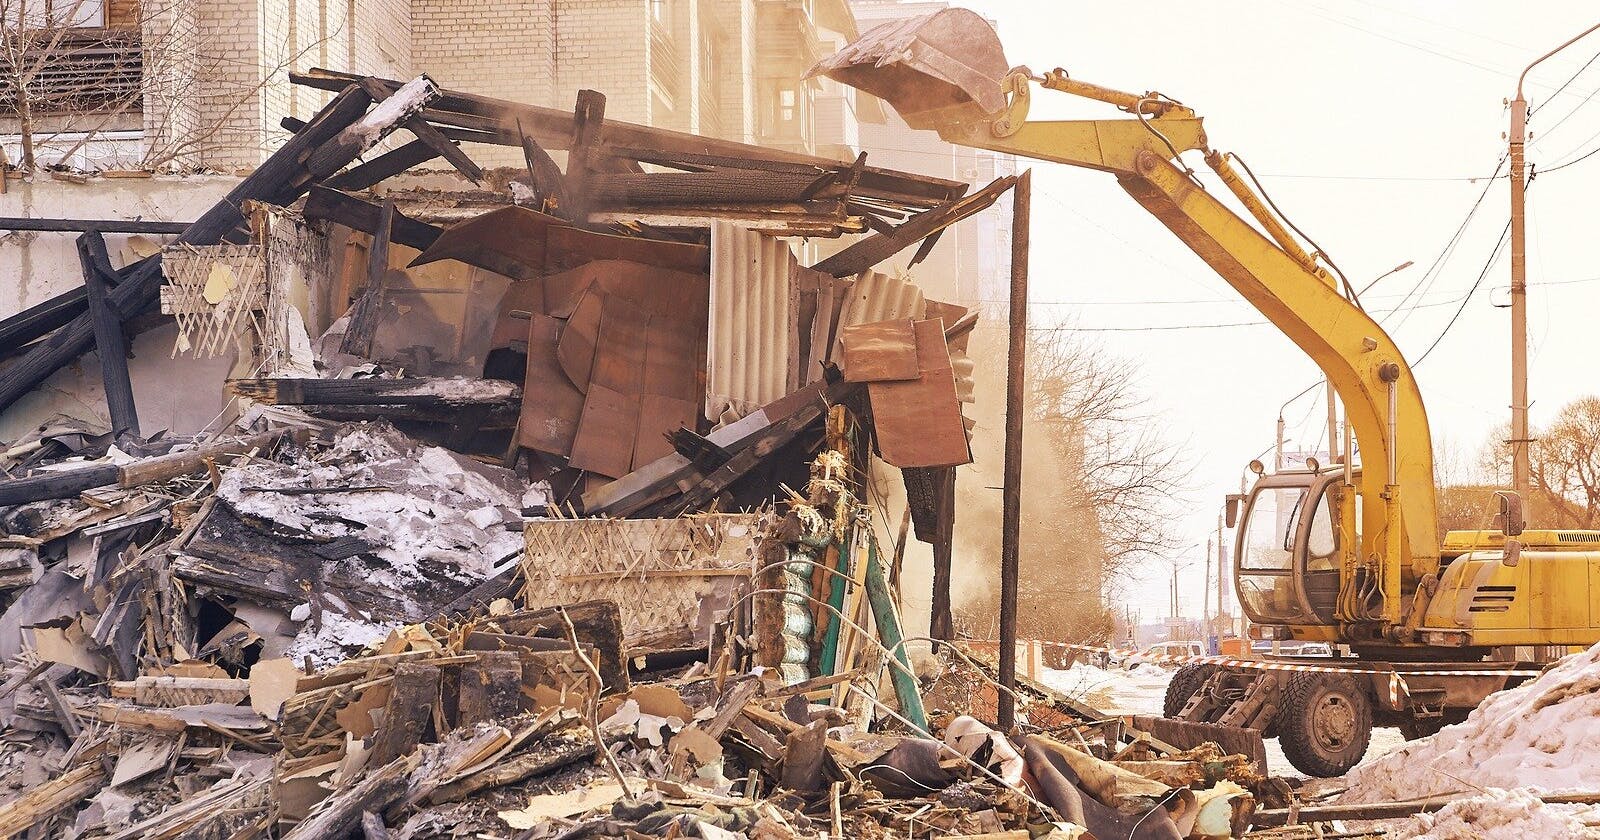 Demolition Contractors: Bringing Down the Old to Make Way for the New